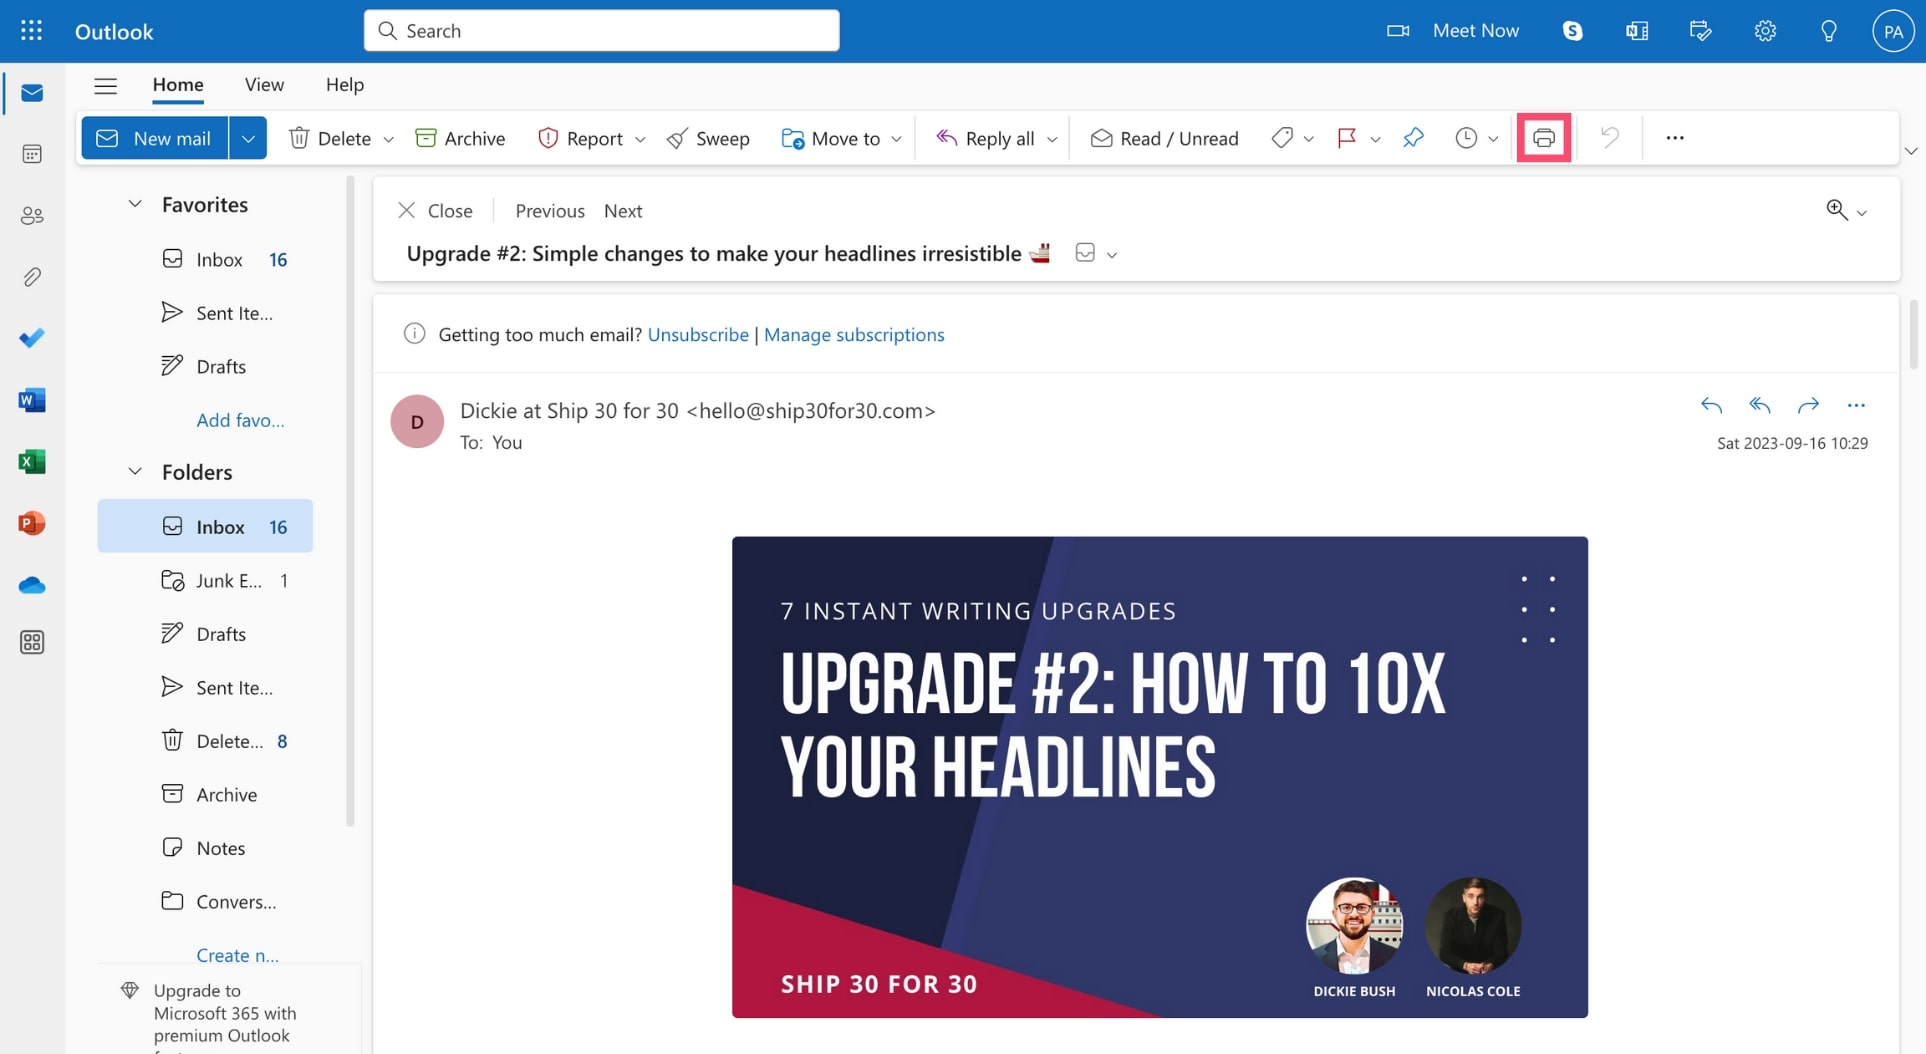 The print feature in Outlook